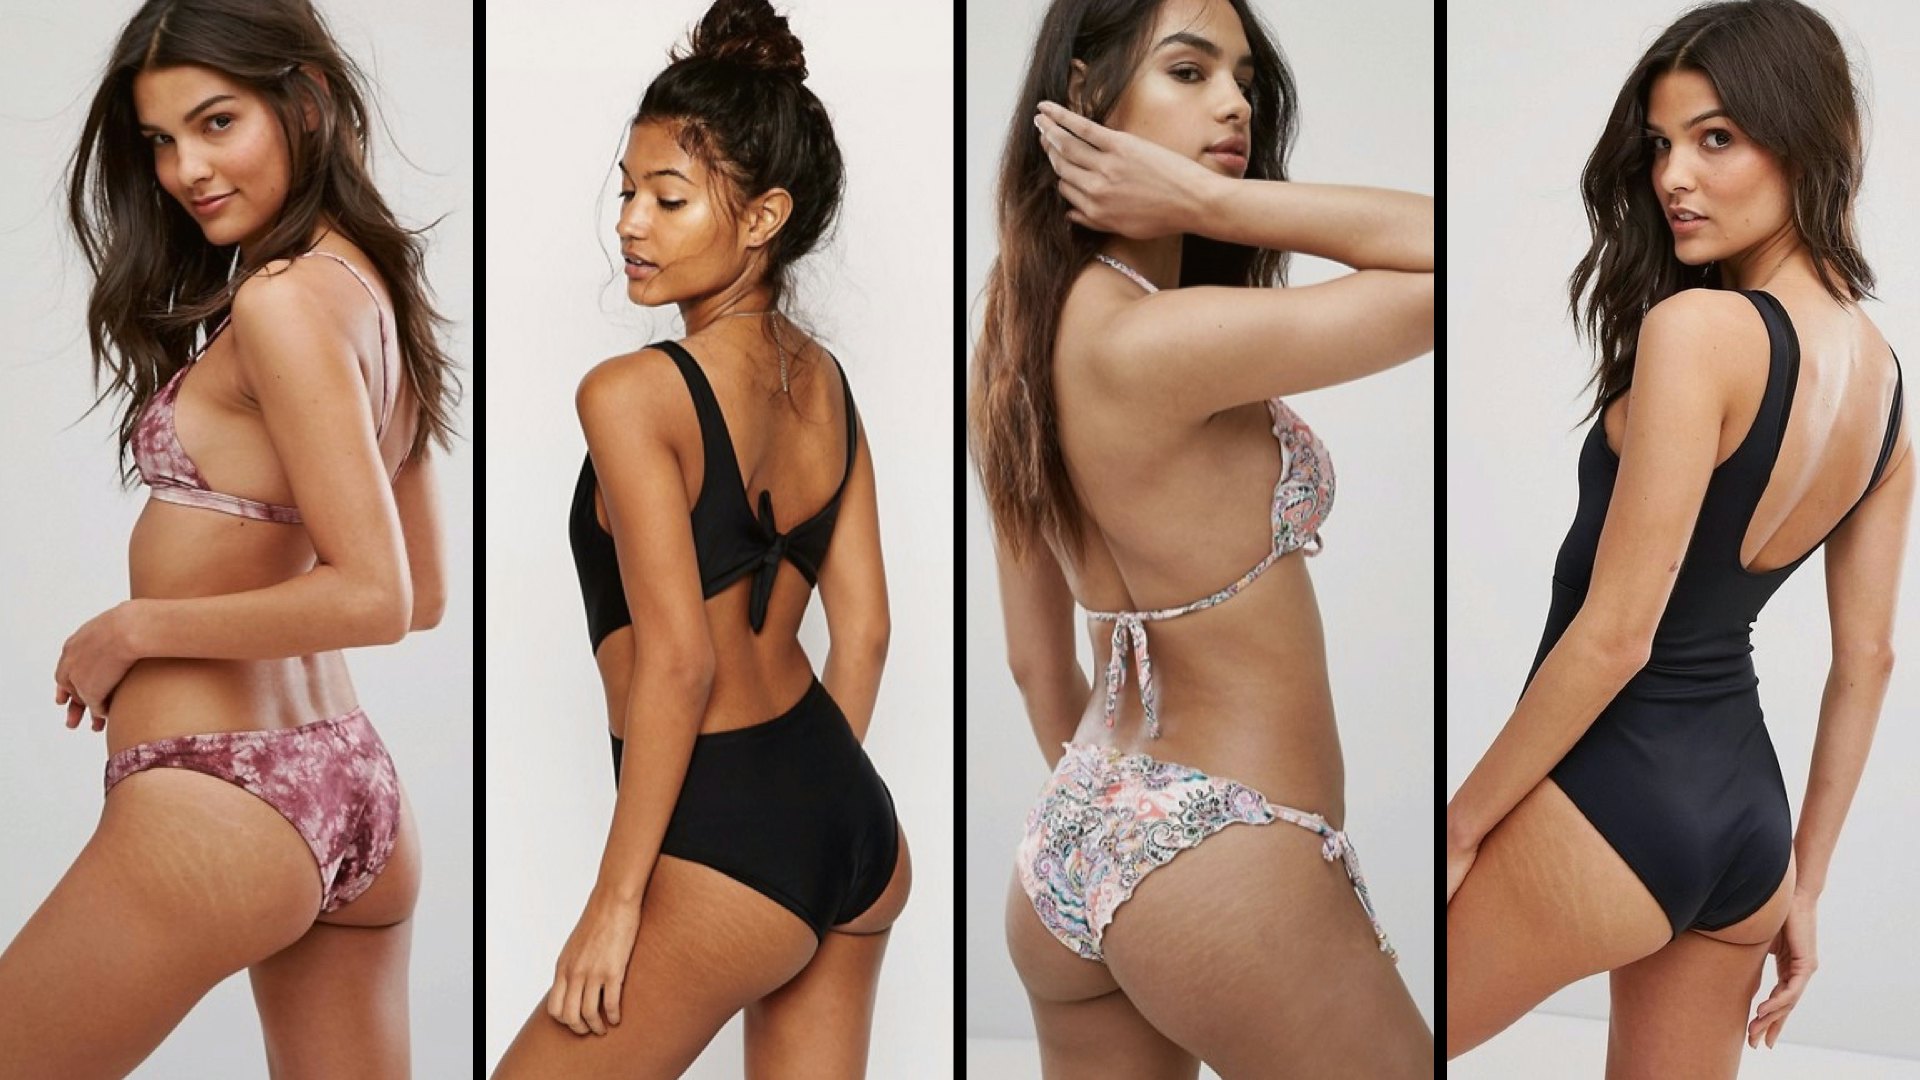 Asos Is Featuring Swimsuit Models with Stretch Marks and Acne Scars